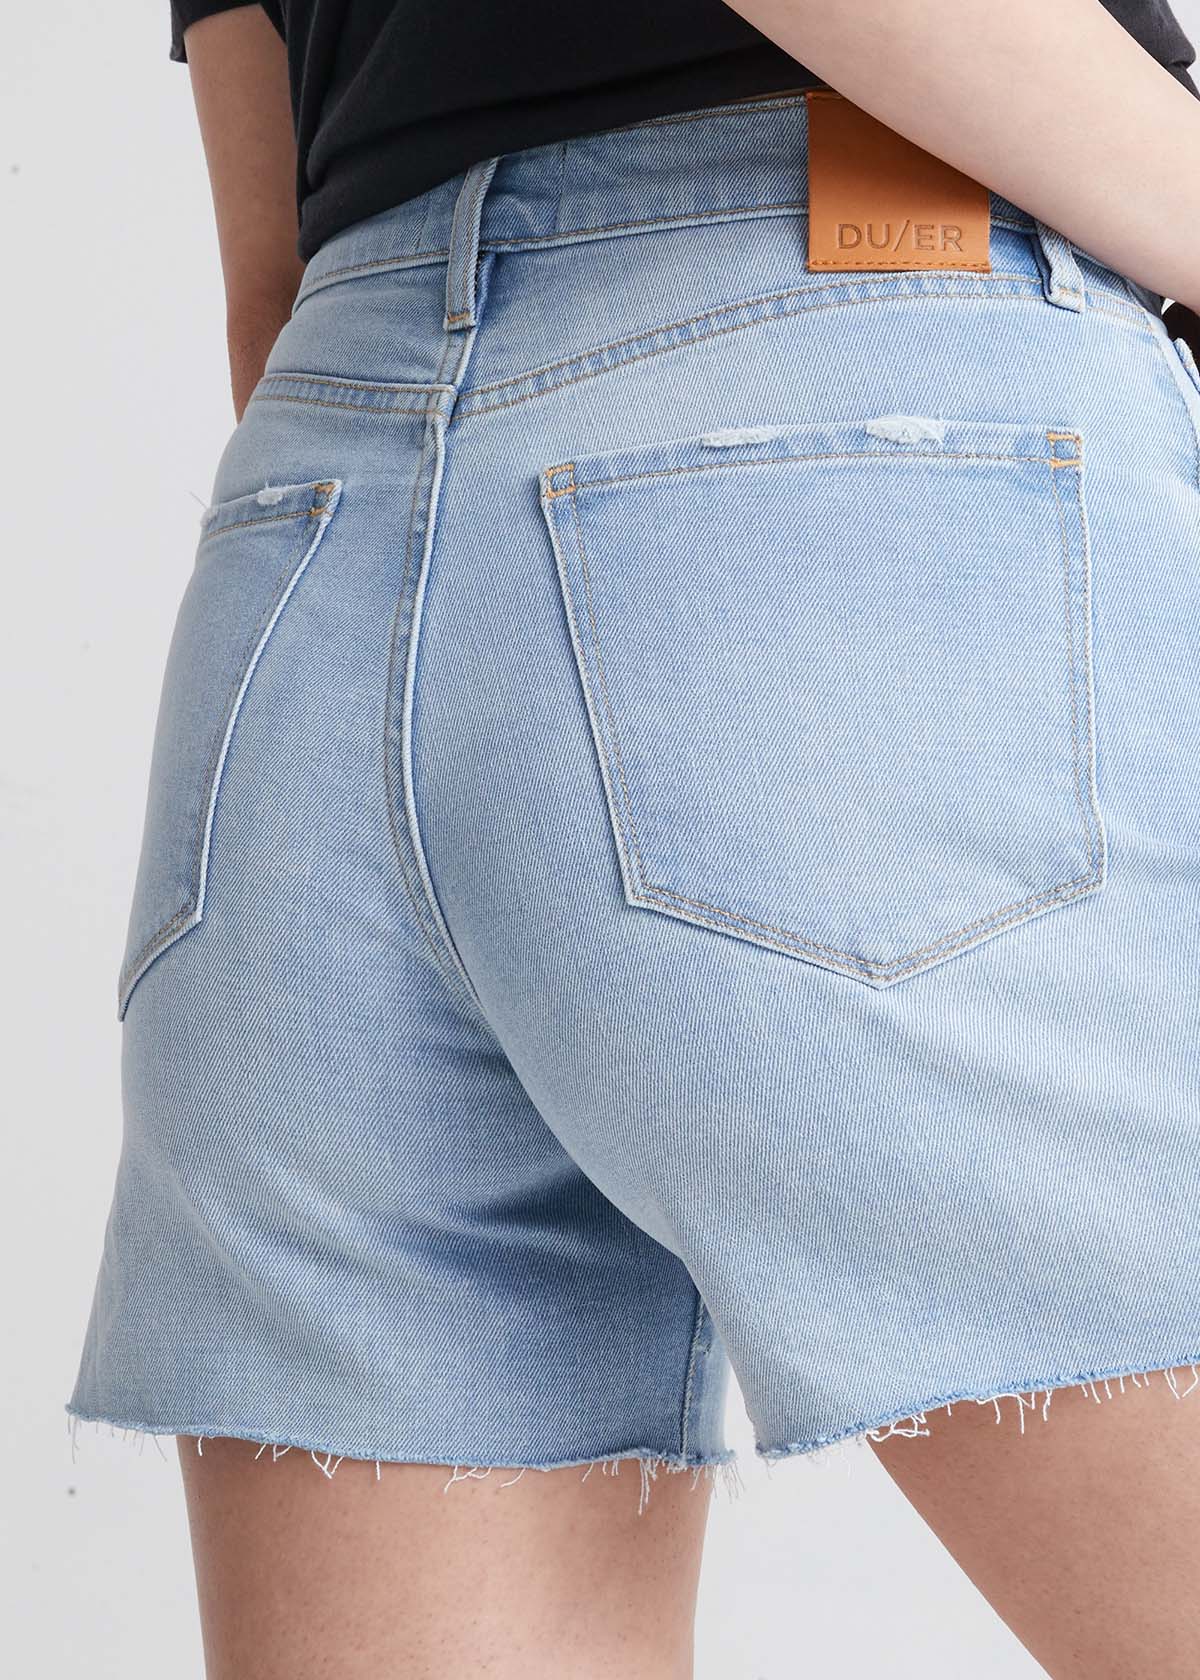 Gufesf Denim Shorts for Women Summer Casual Short Pants High Waisted Jean  Shorts Stretch Jean Shorts